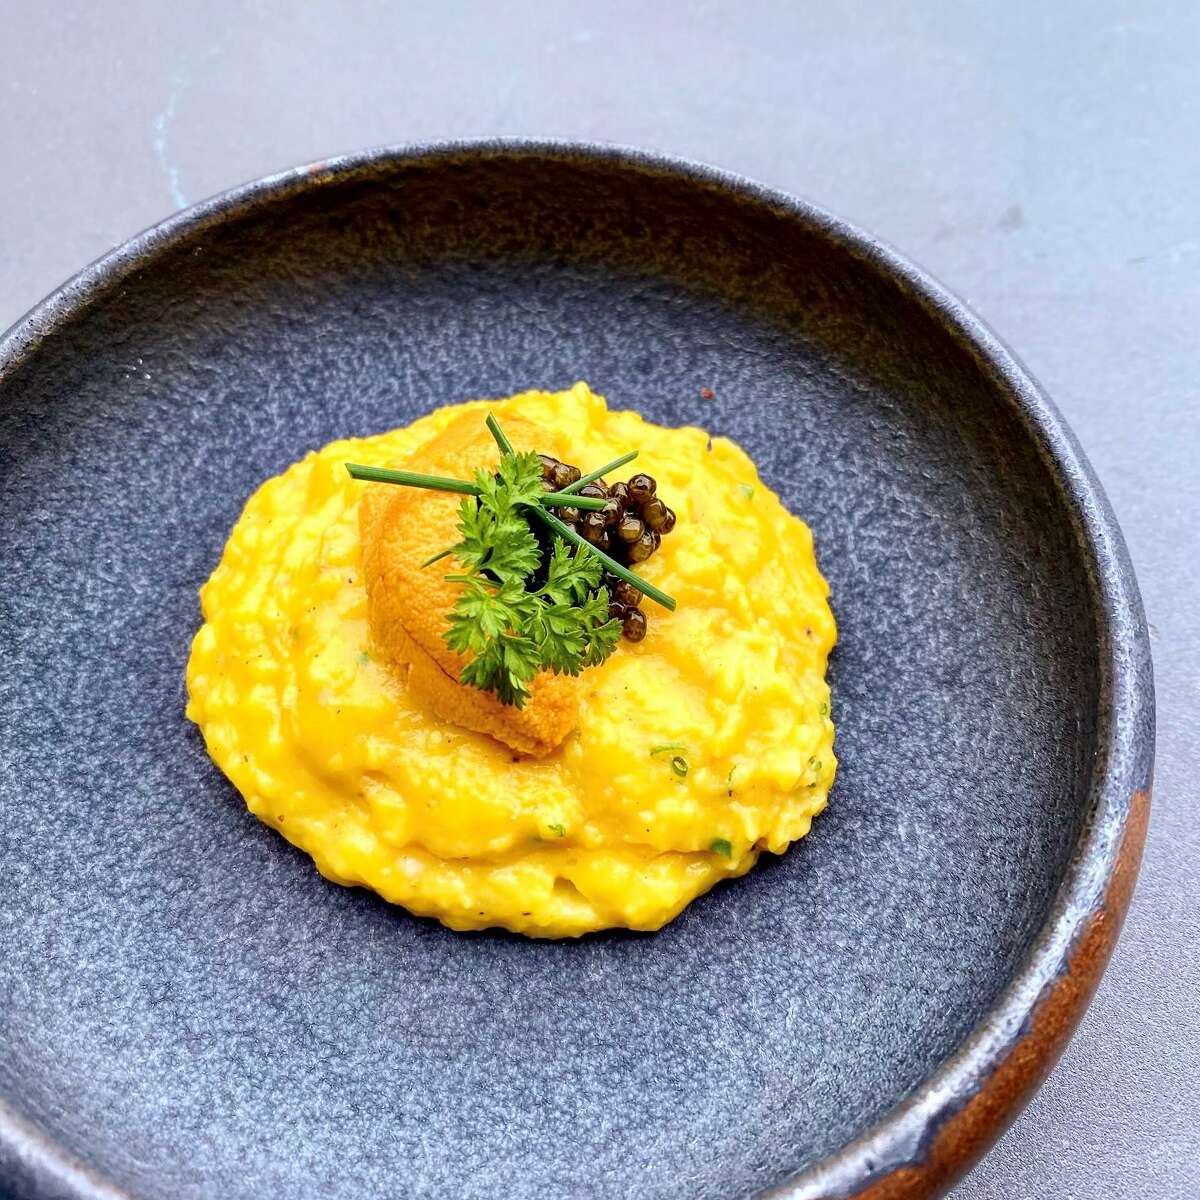 The "Eggs on Eggs on Eggs" (soft scrambled eggs topped with uni and Siberian osetra caviar) is a secret menu dish at 1751 Sea and Bar.